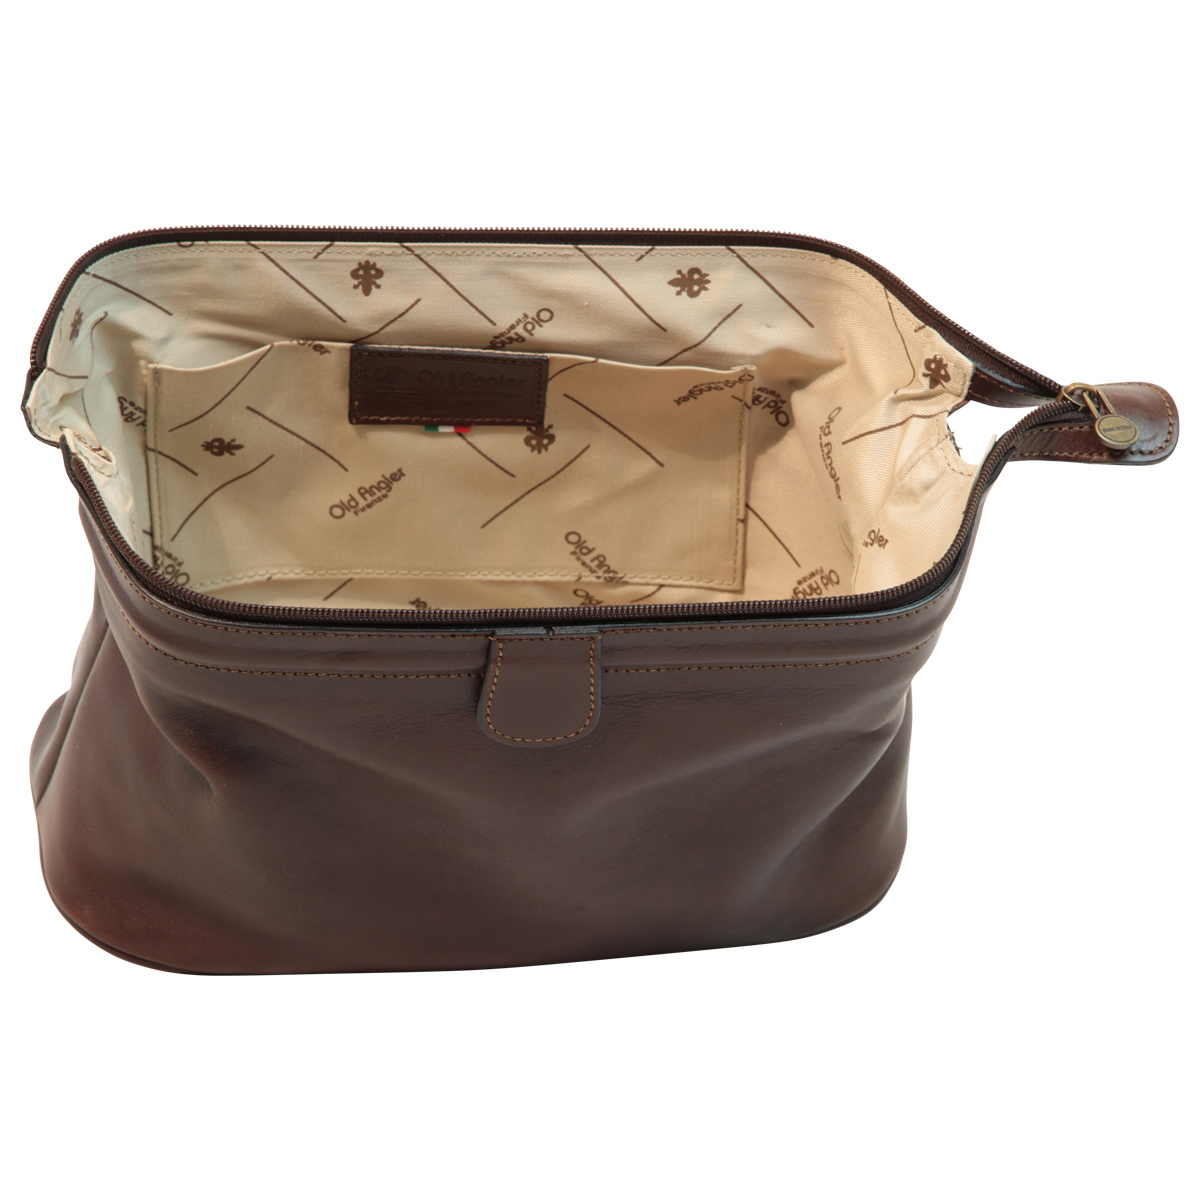 Leather Beauty Case - Dark Brown | 065489TM | EURO | Old Angler Firenze